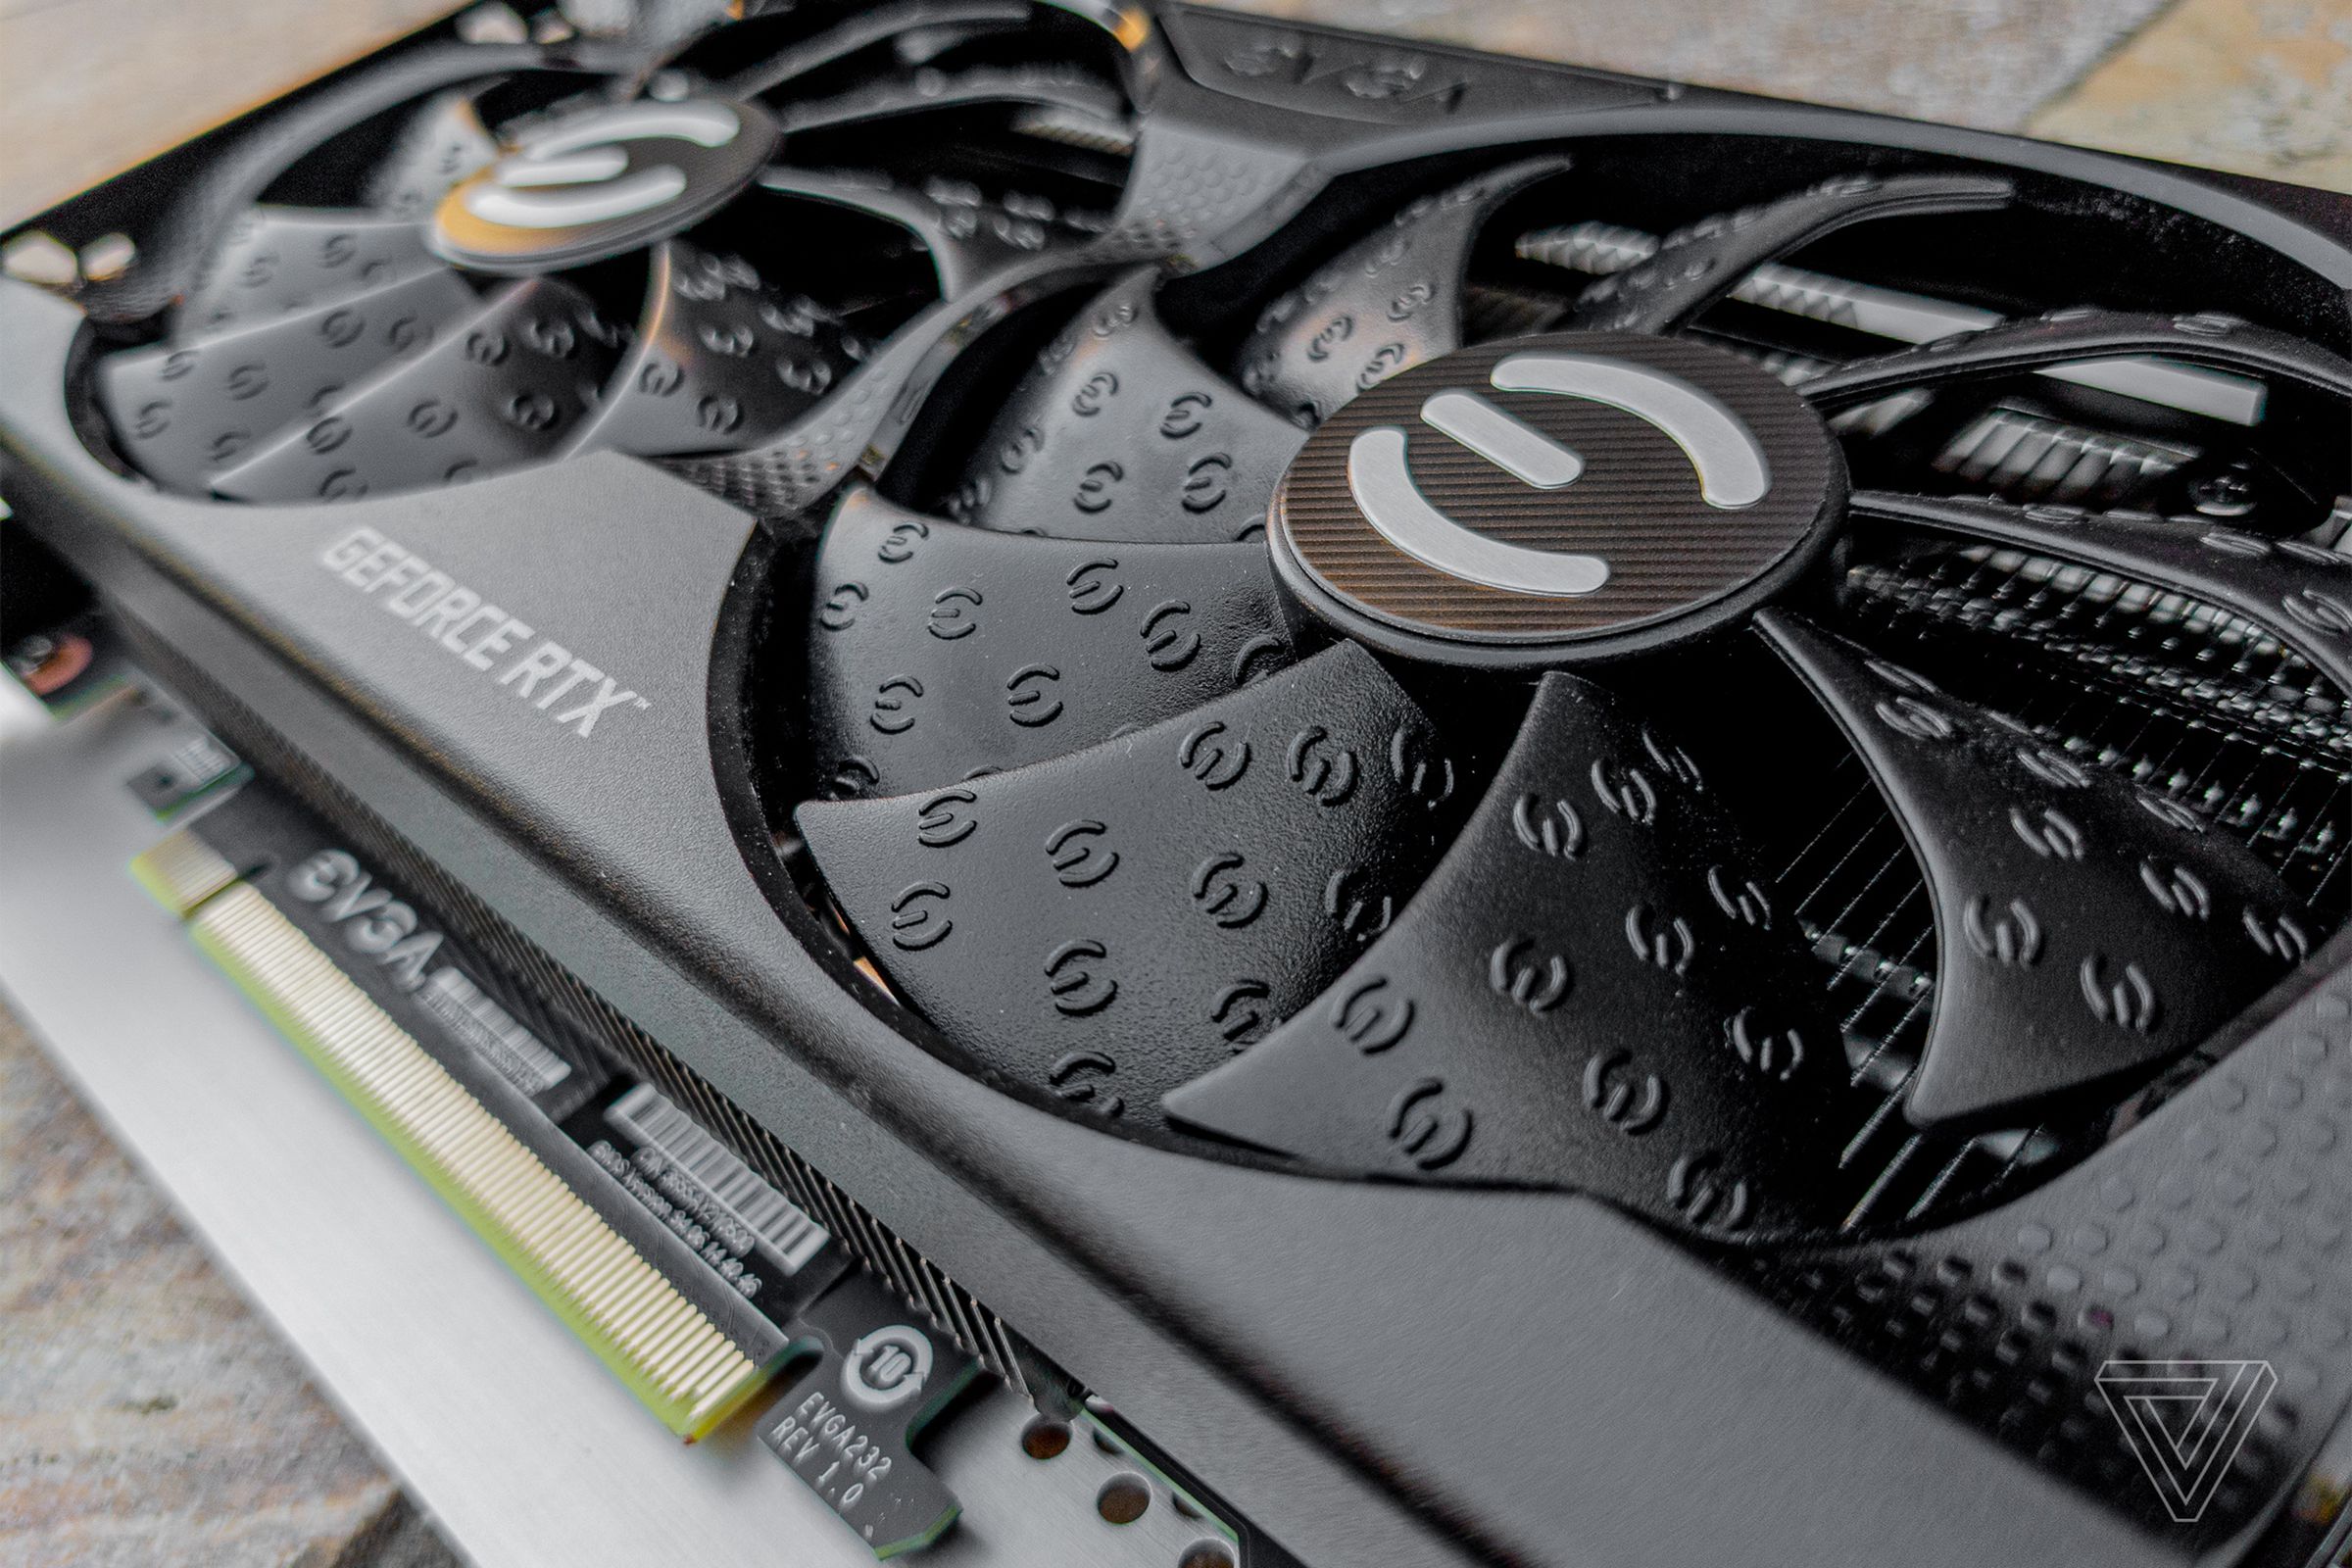 EVGA’s RTX 3060 comes with a lot of embossed “E” symbols.